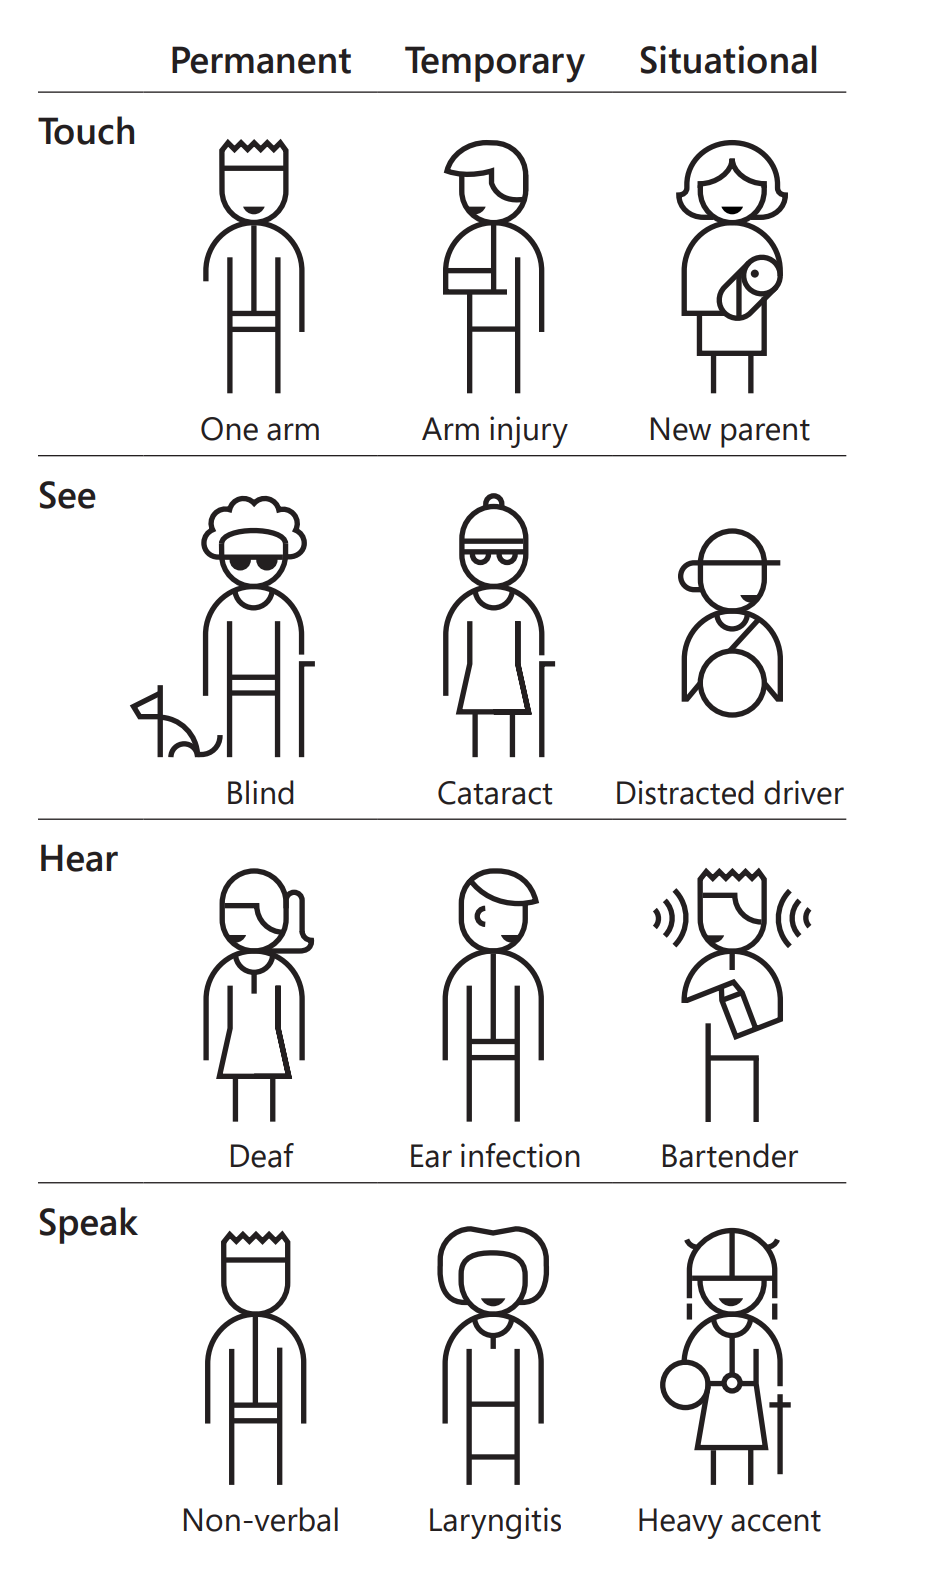 Image showing the continuum of disabilities.